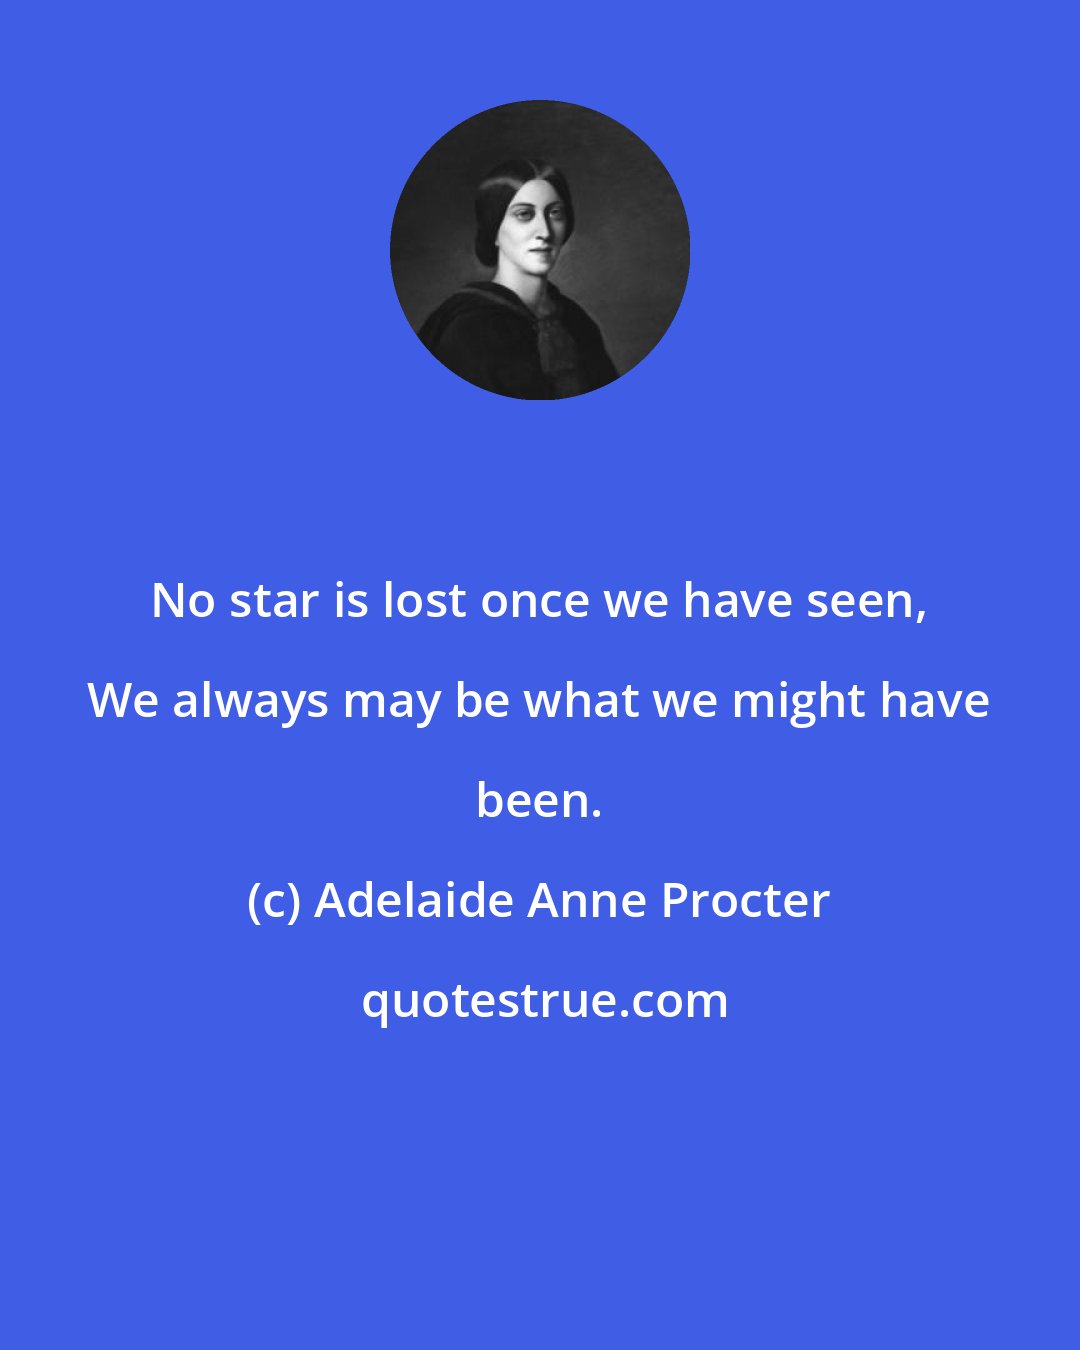 Adelaide Anne Procter: No star is lost once we have seen, We always may be what we might have been.